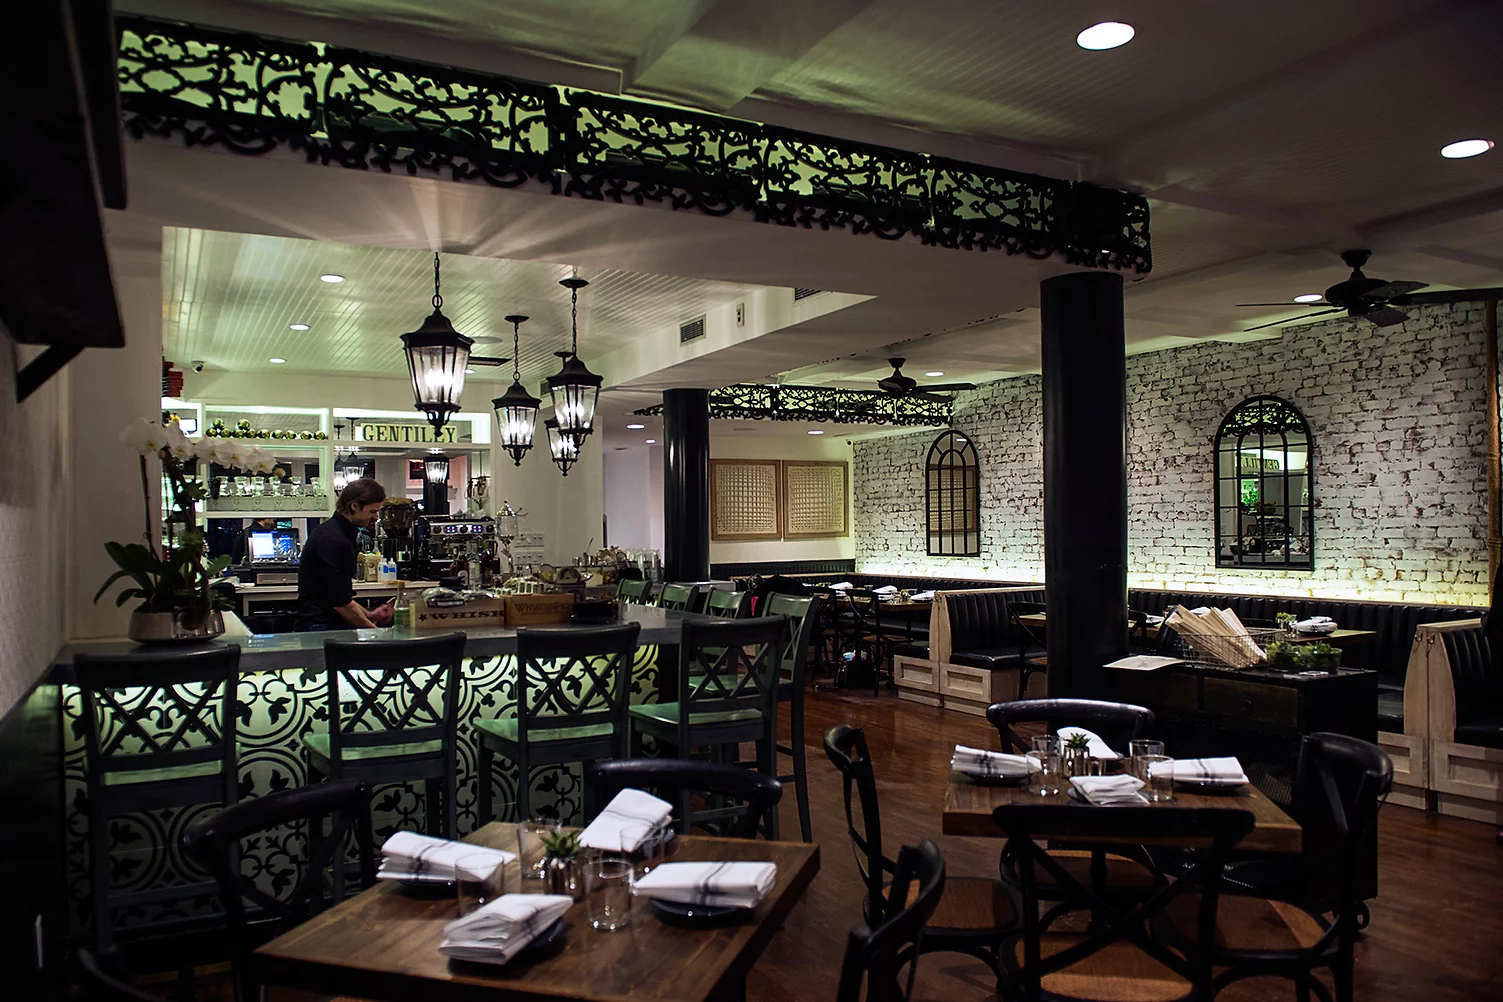 Gentilly Kitchen + Bar, based in New York City, is an example of an establishment that Blackwood Hospitality has worked with. Source: Blackwood Hospitality, 2022